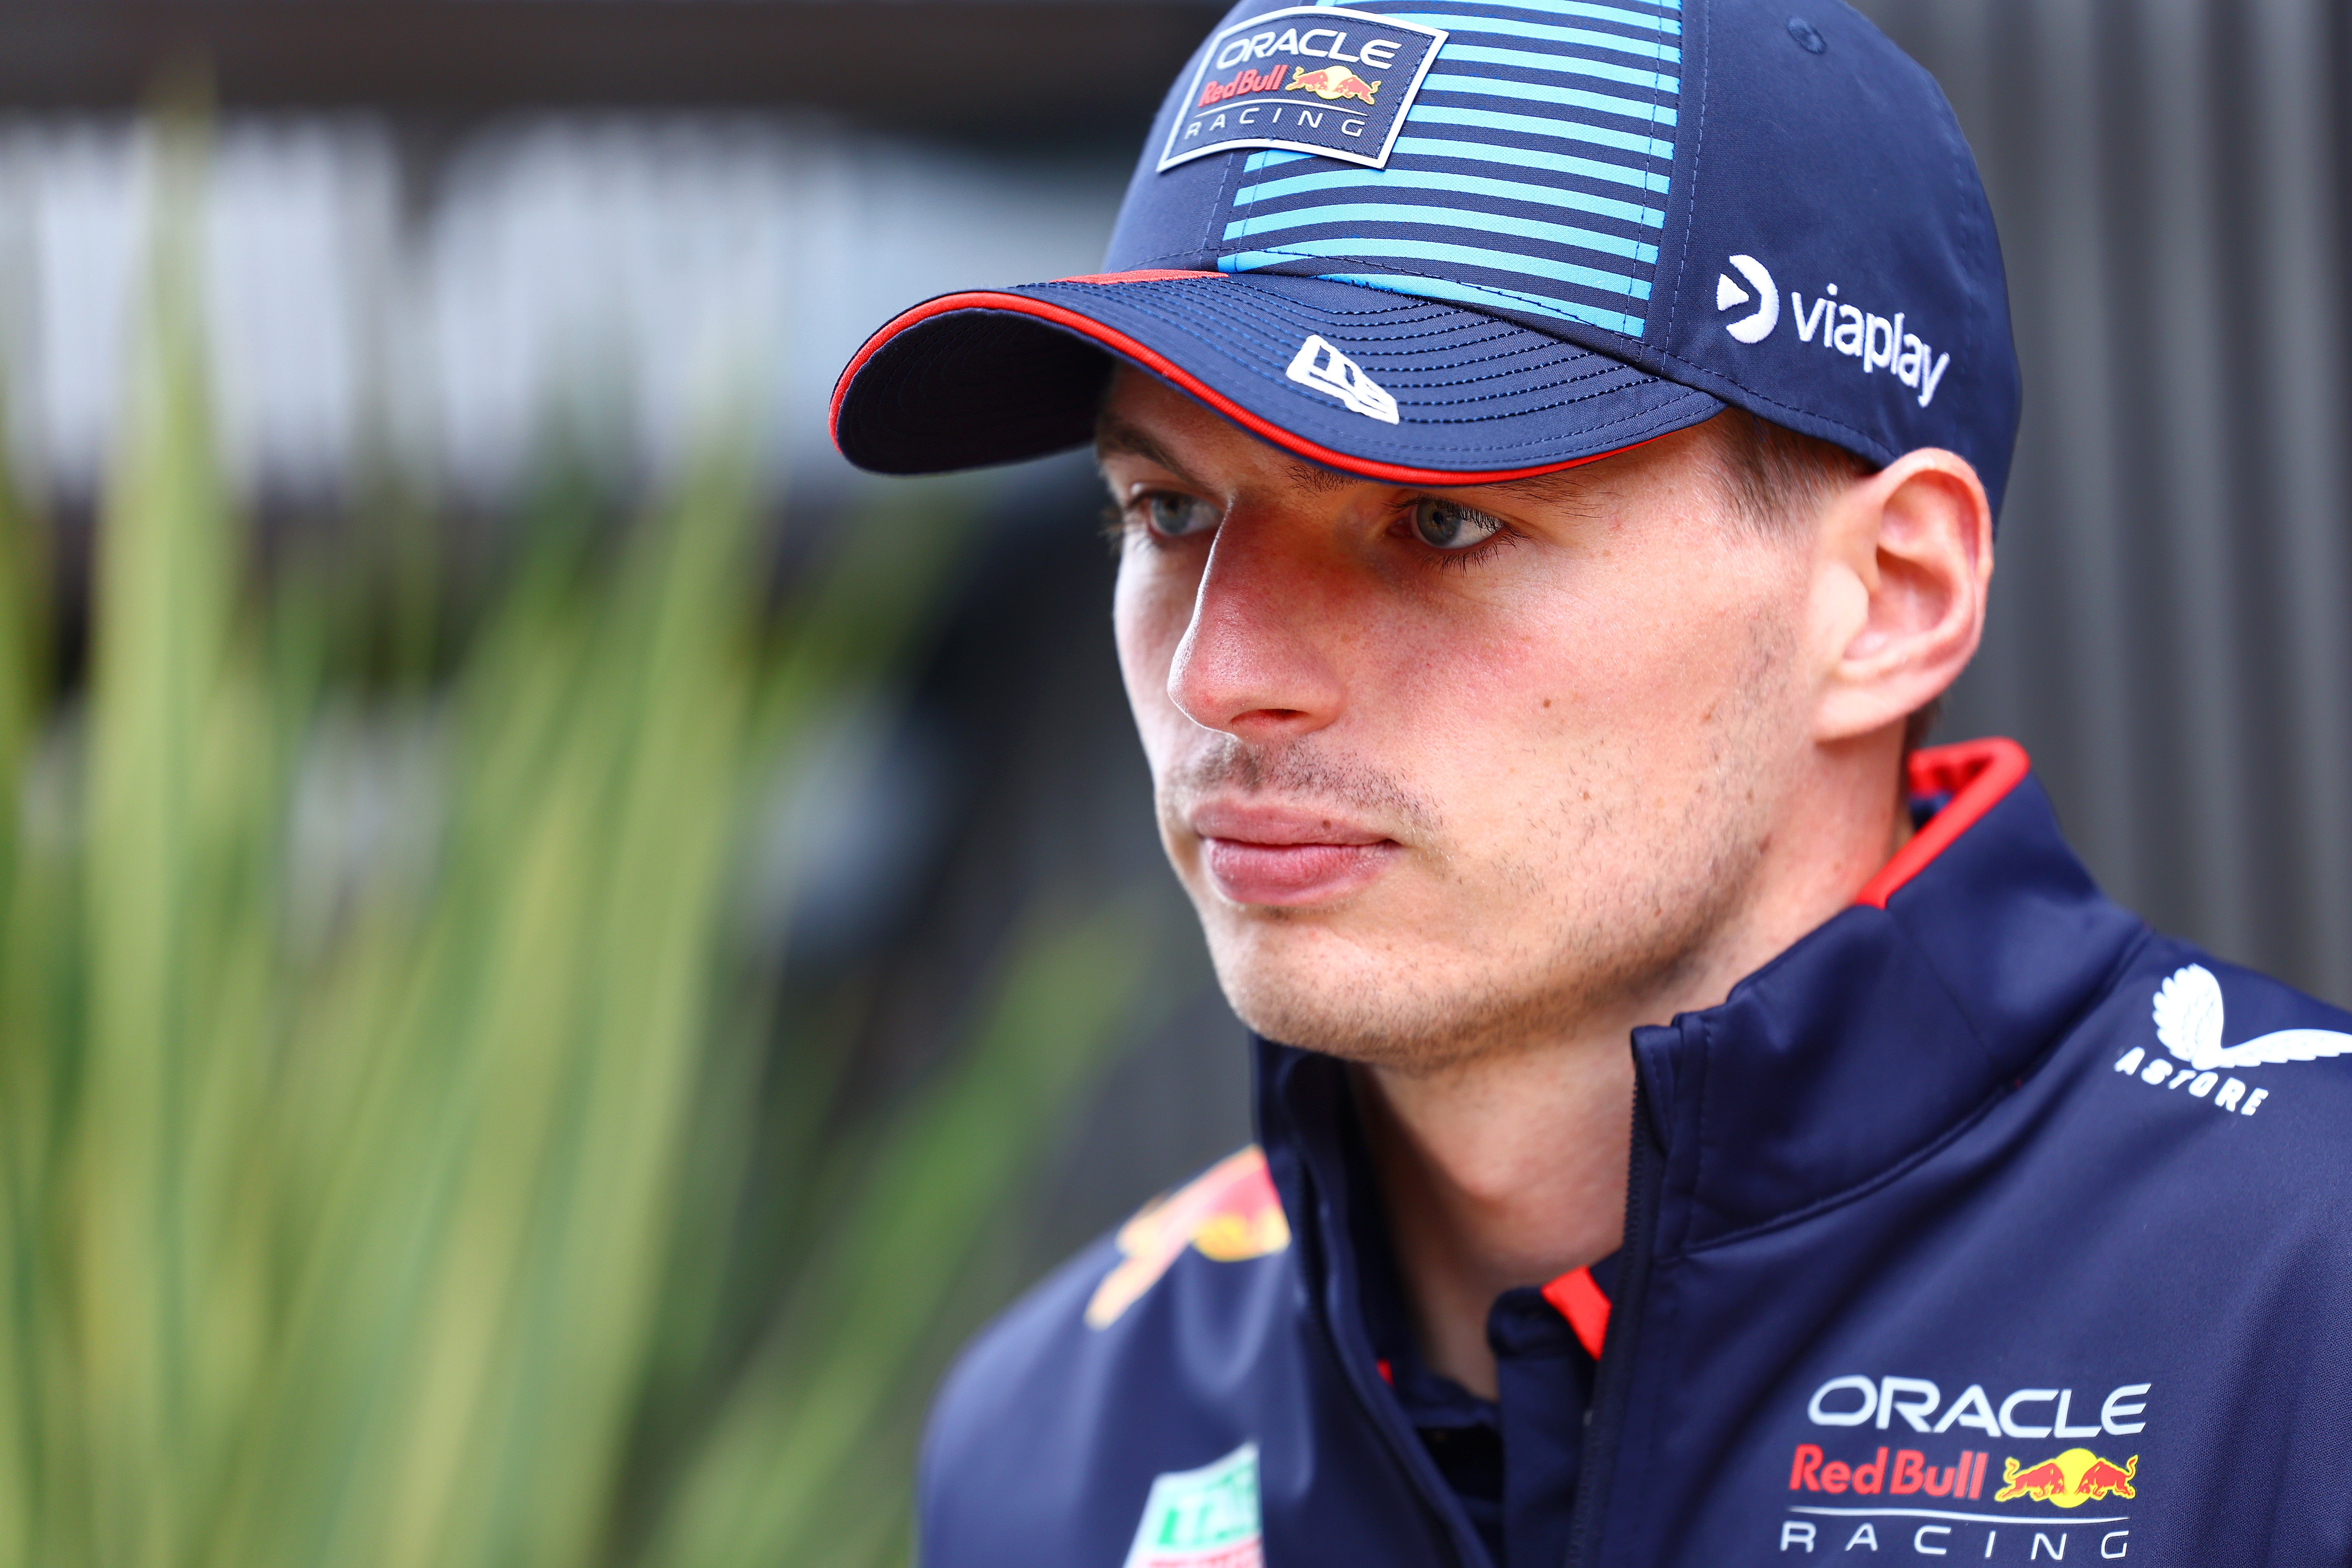 Max Verstappen leads the world championship by 81 points heading into Silverstone